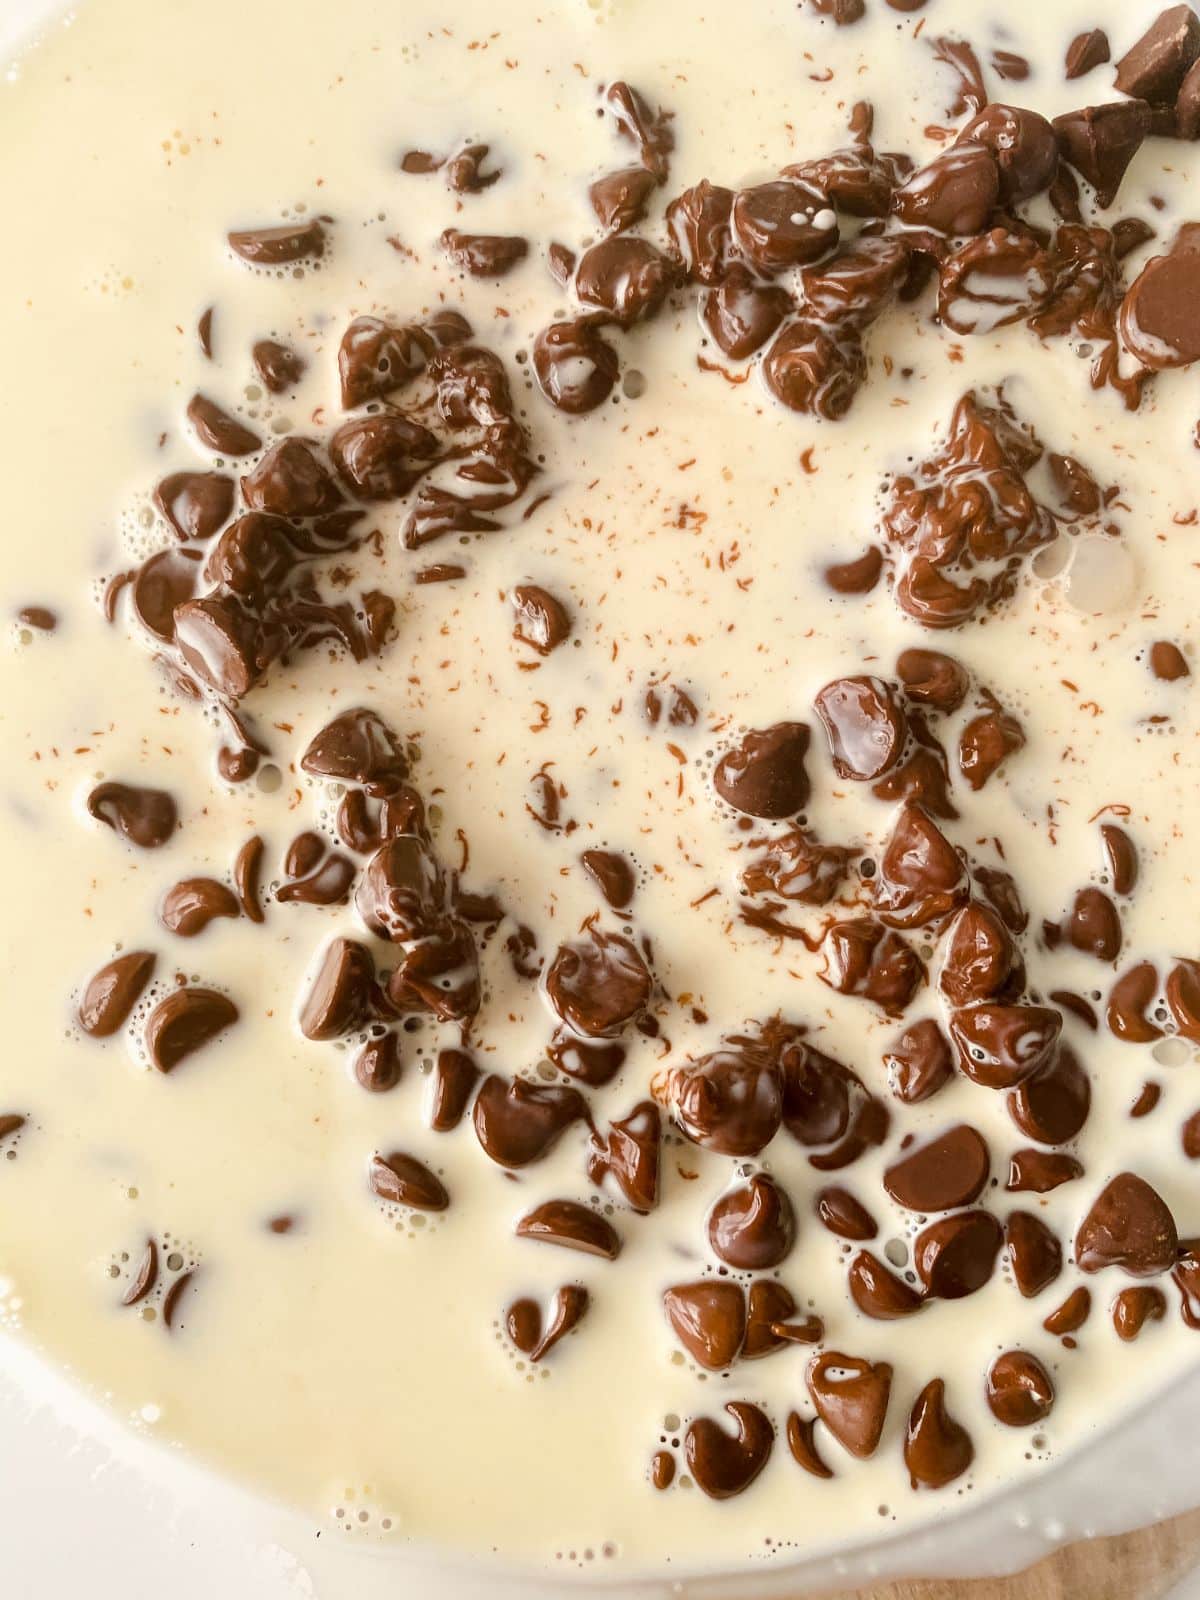 cream and chocolate chips in bowl